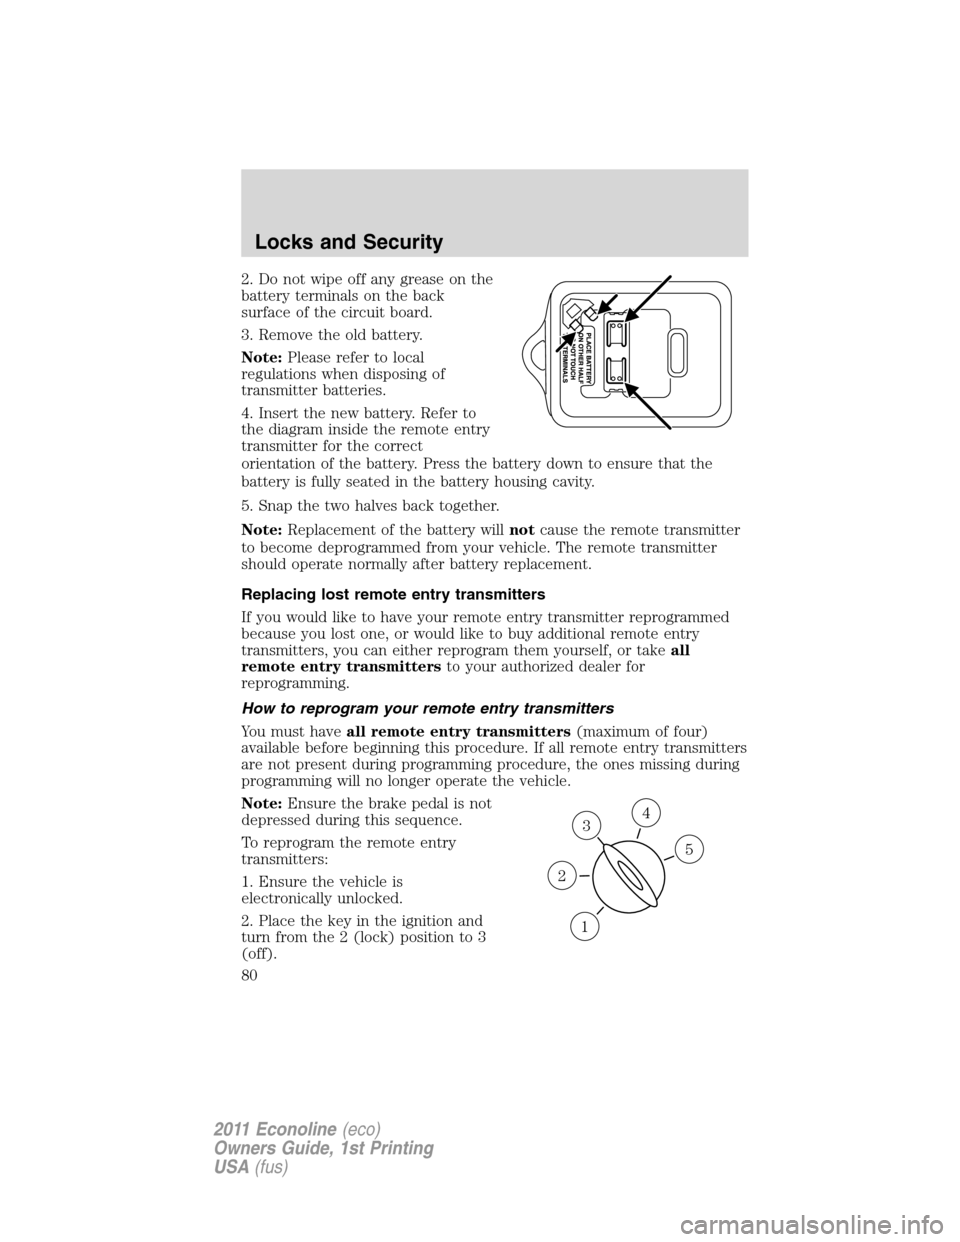 FORD E SERIES 2011 4.G Owners Manual 2. Do not wipe off any grease on the
battery terminals on the back
surface of the circuit board.
3. Remove the old battery.
Note:Please refer to local
regulations when disposing of
transmitter batteri